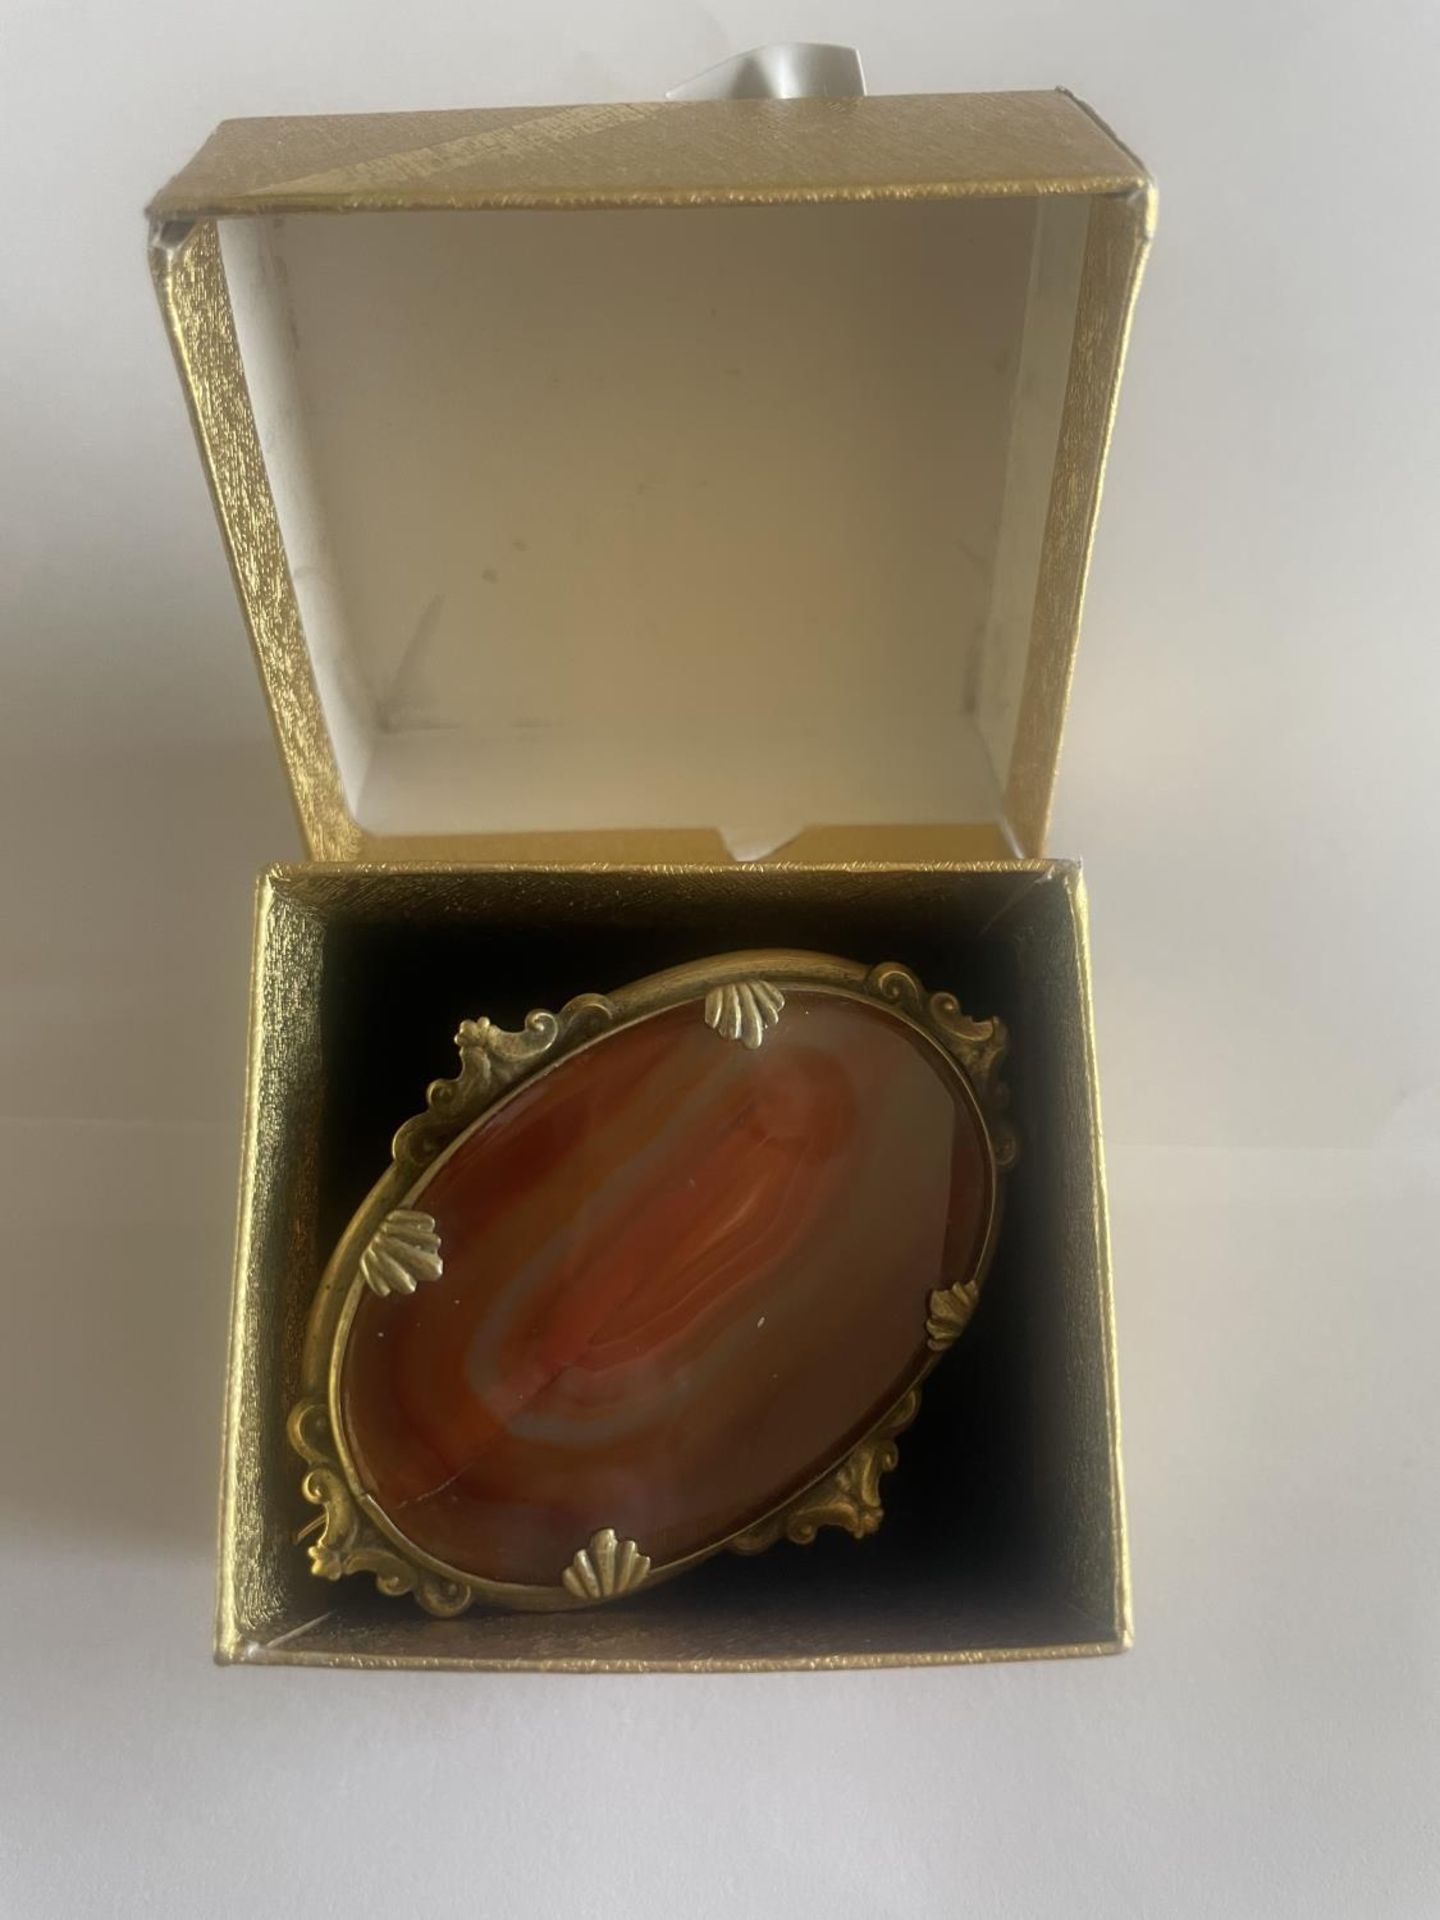 A PINCH BECK BROOCH WITH A LARGE AGATE STONE IN A PRESENTATION BOX - Image 3 of 3